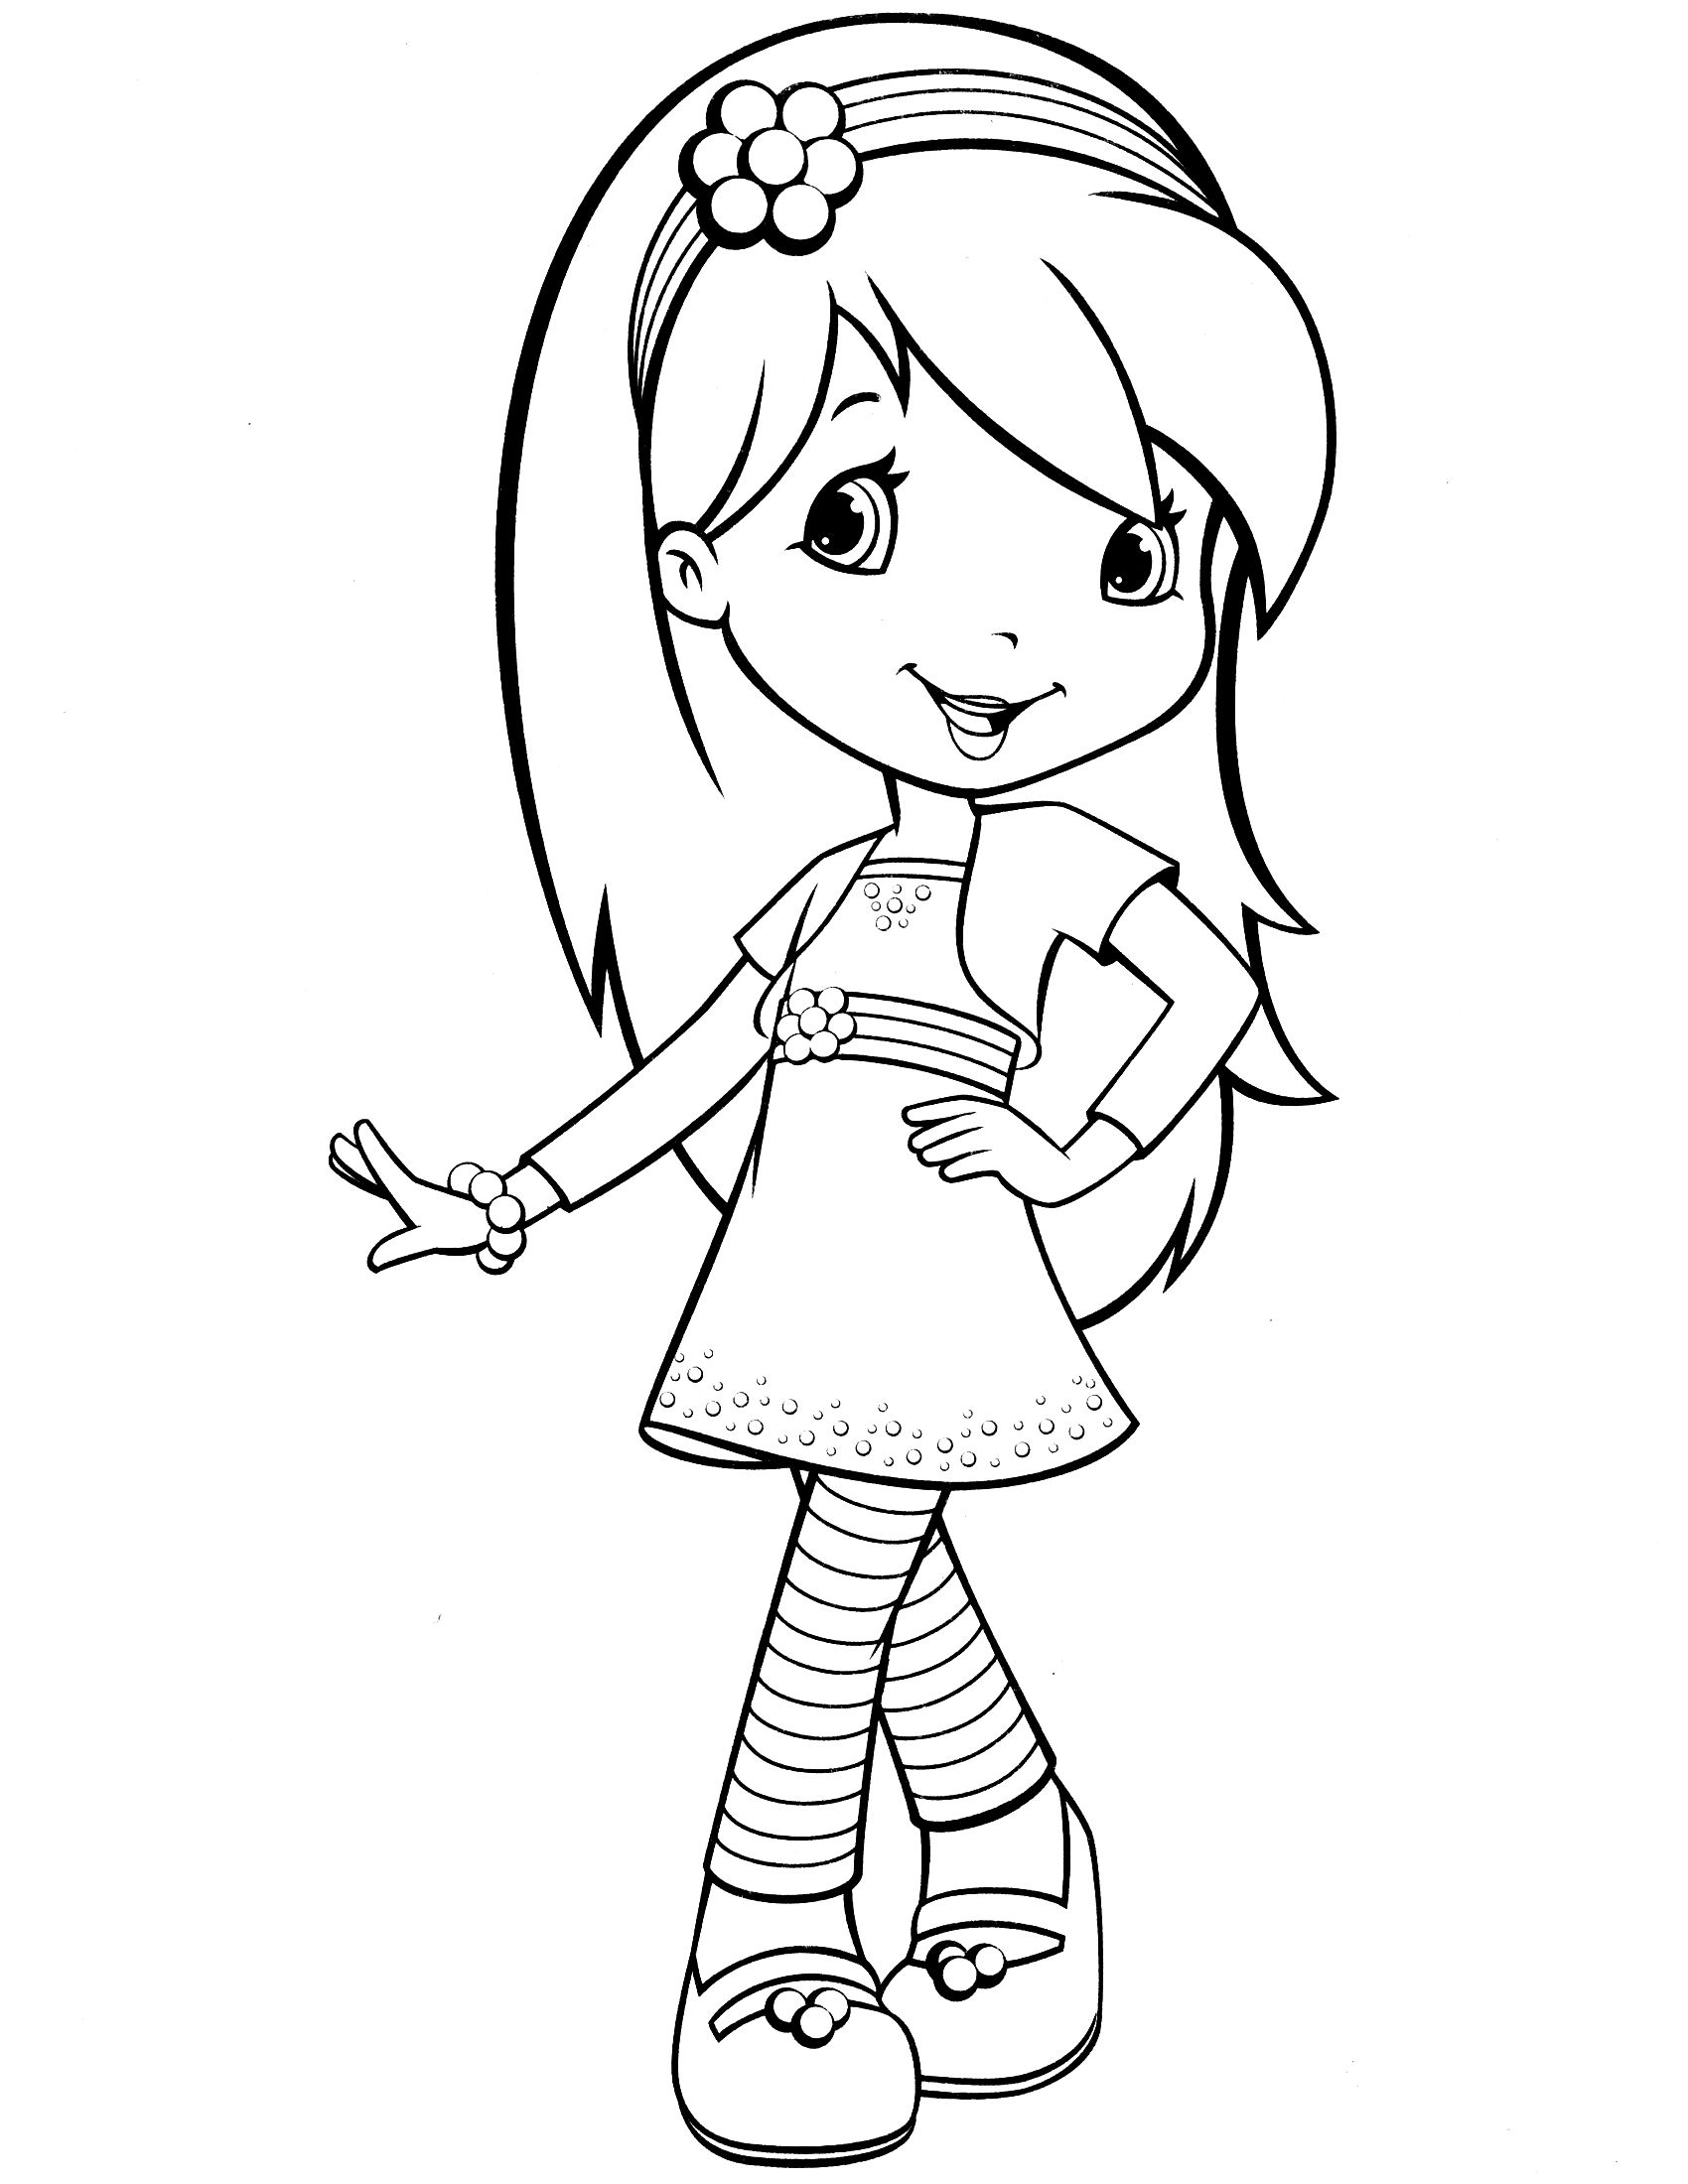 coloring pages for kids strawberry shortcake